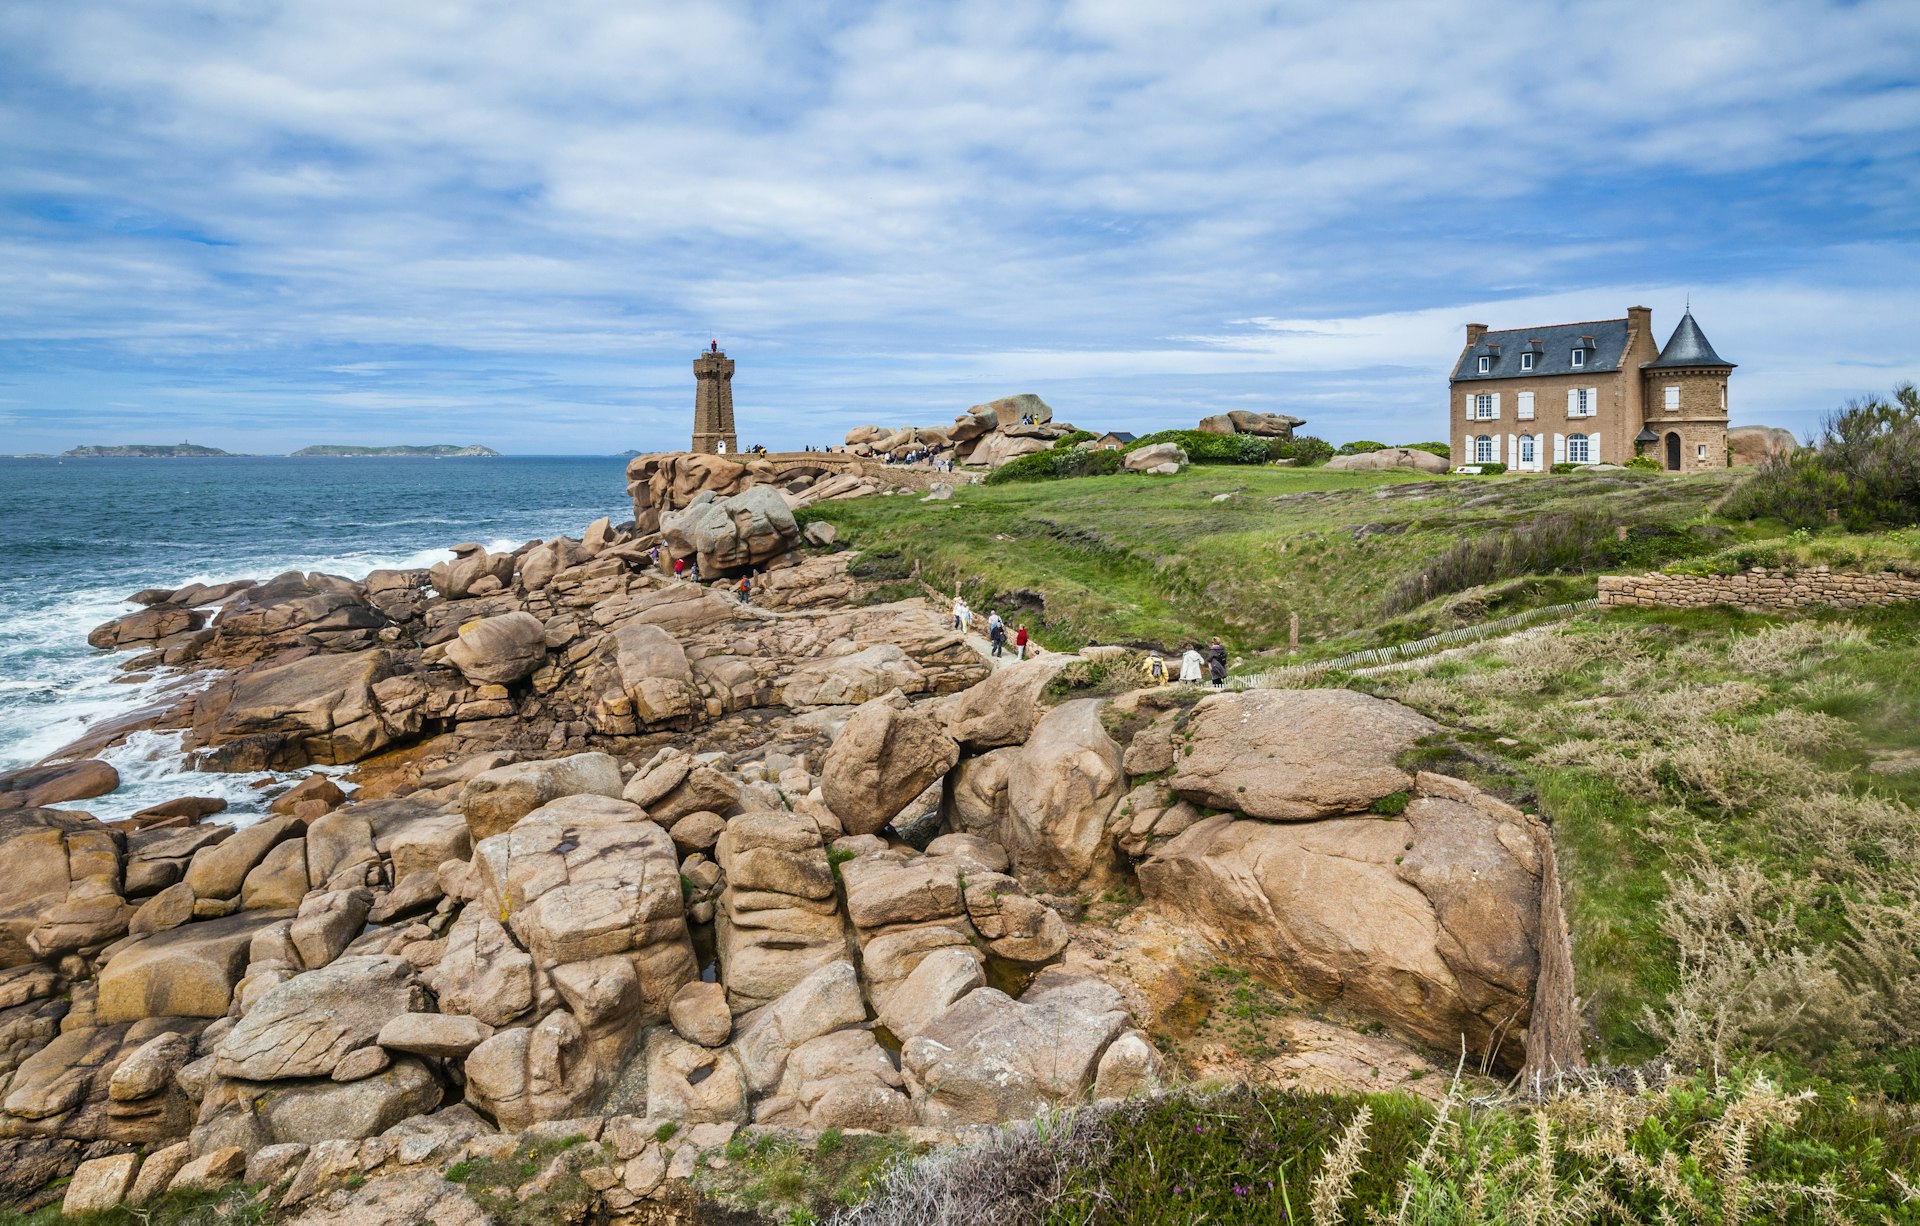 France, Brittany, Cotes d'Armor department, Cote de Granit Rose, Ploumanac'h, Sentier des Douaniers (old customs officers Path) on the Pink granite coast with view of the Ploumanac'h lighthouse